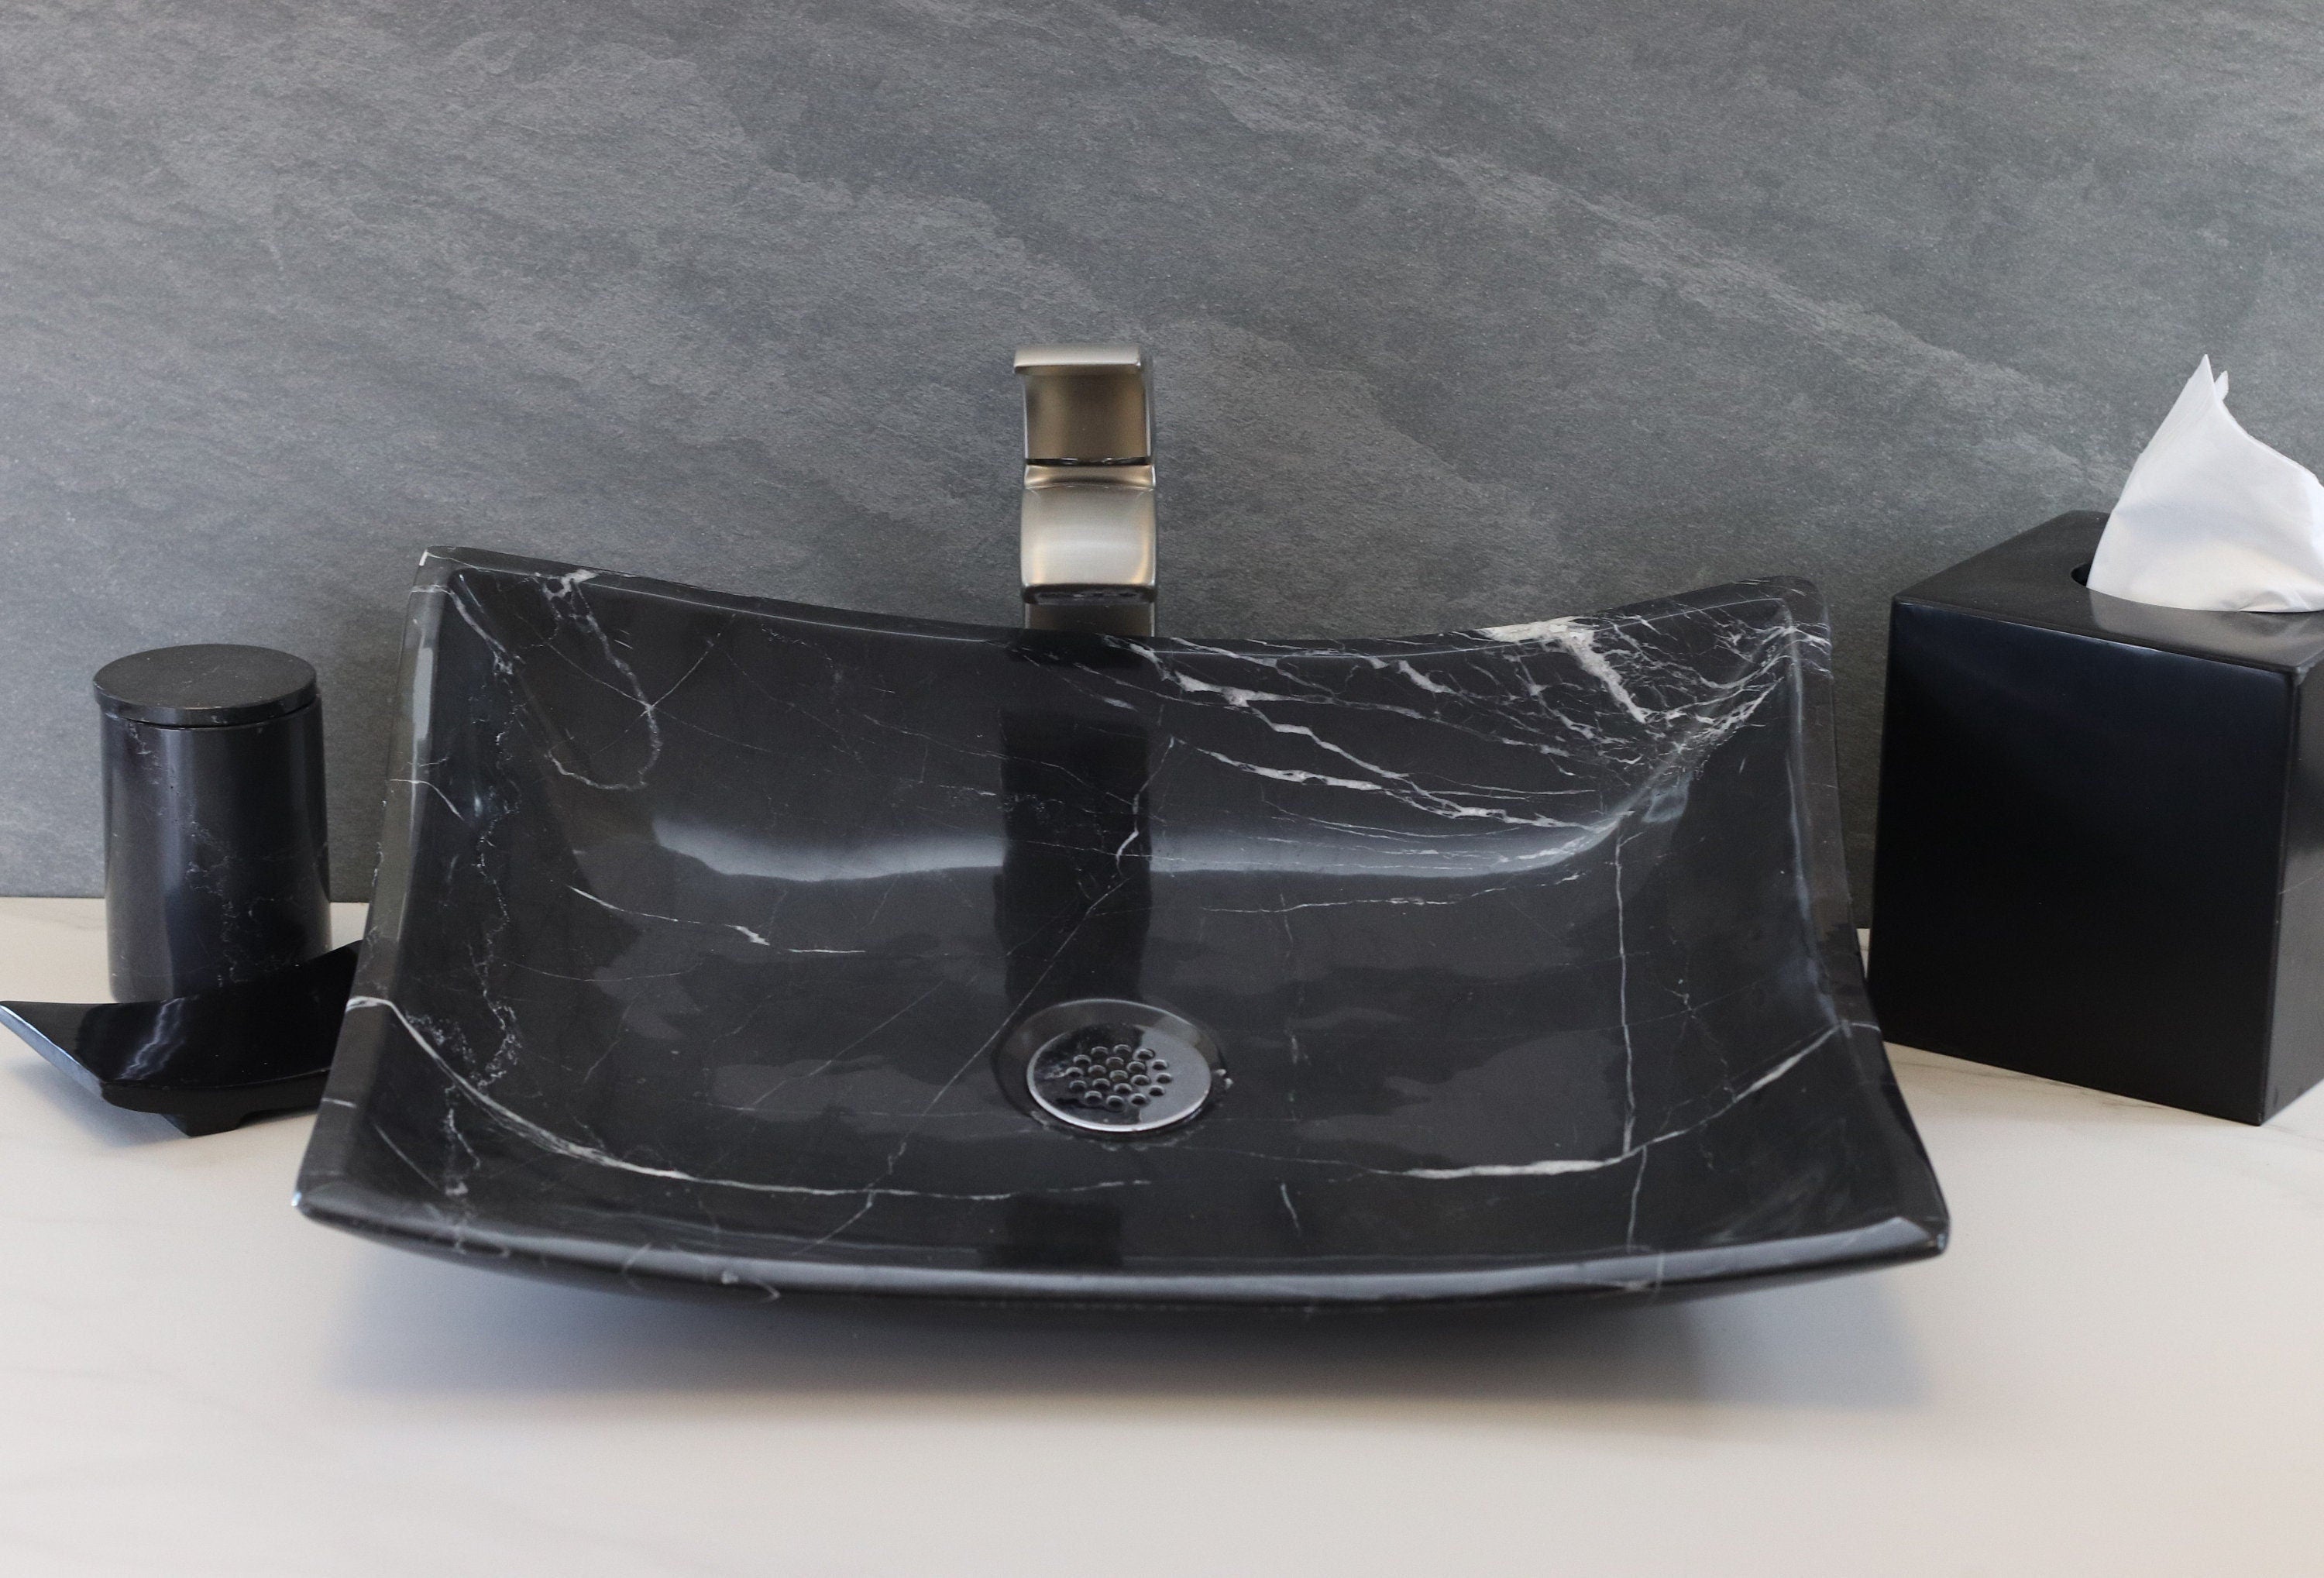 Rectangle Black Marble Polished Finish Vessel Sink. A beautiful work of art. We offer fast shipping. Handmade in Mexico. We hand finish, package, and ship from the USA. Buy now at www.felipeandgrace.com. 